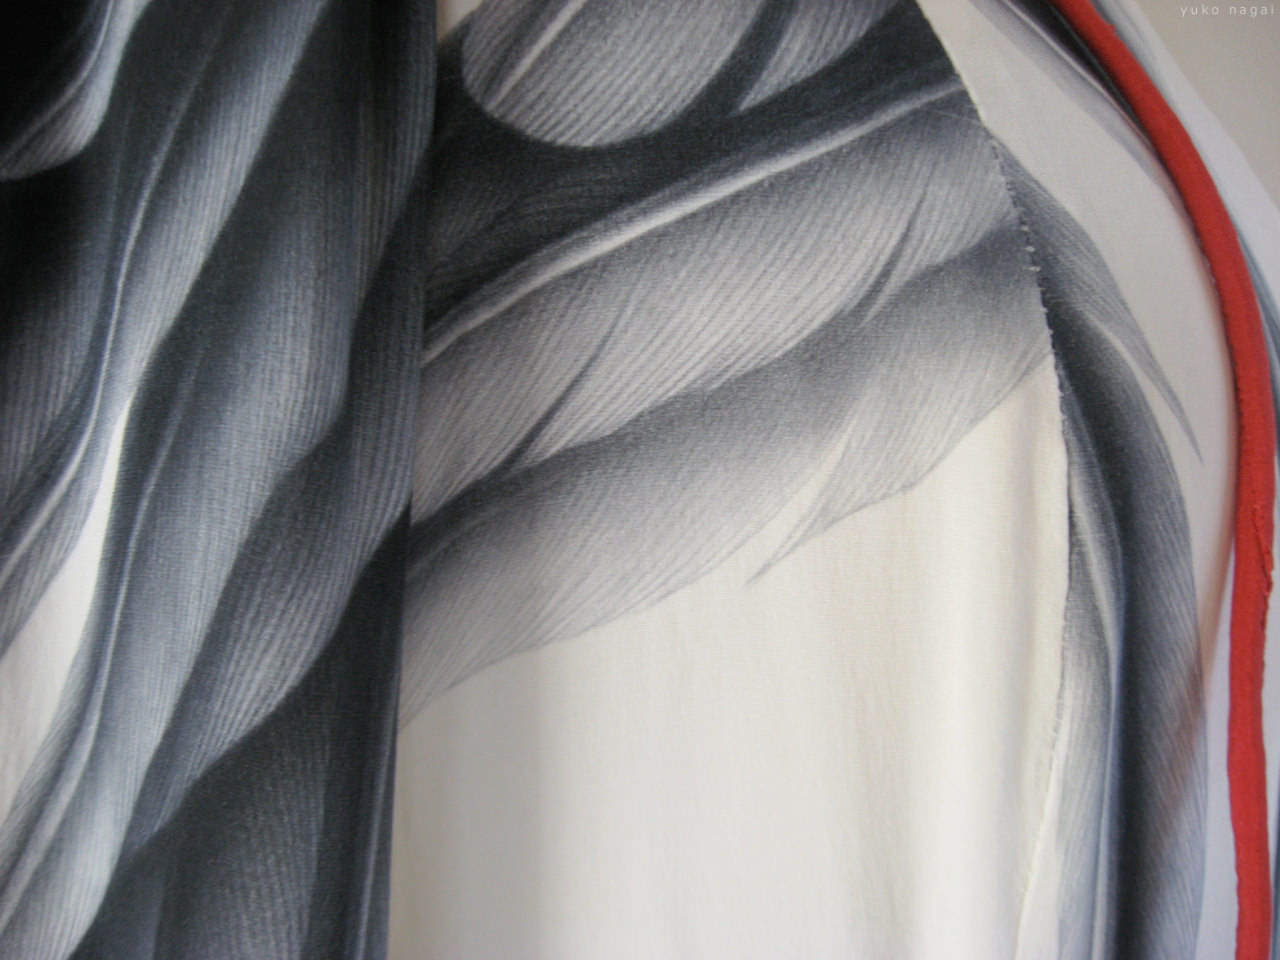 A wing painting on a dress.